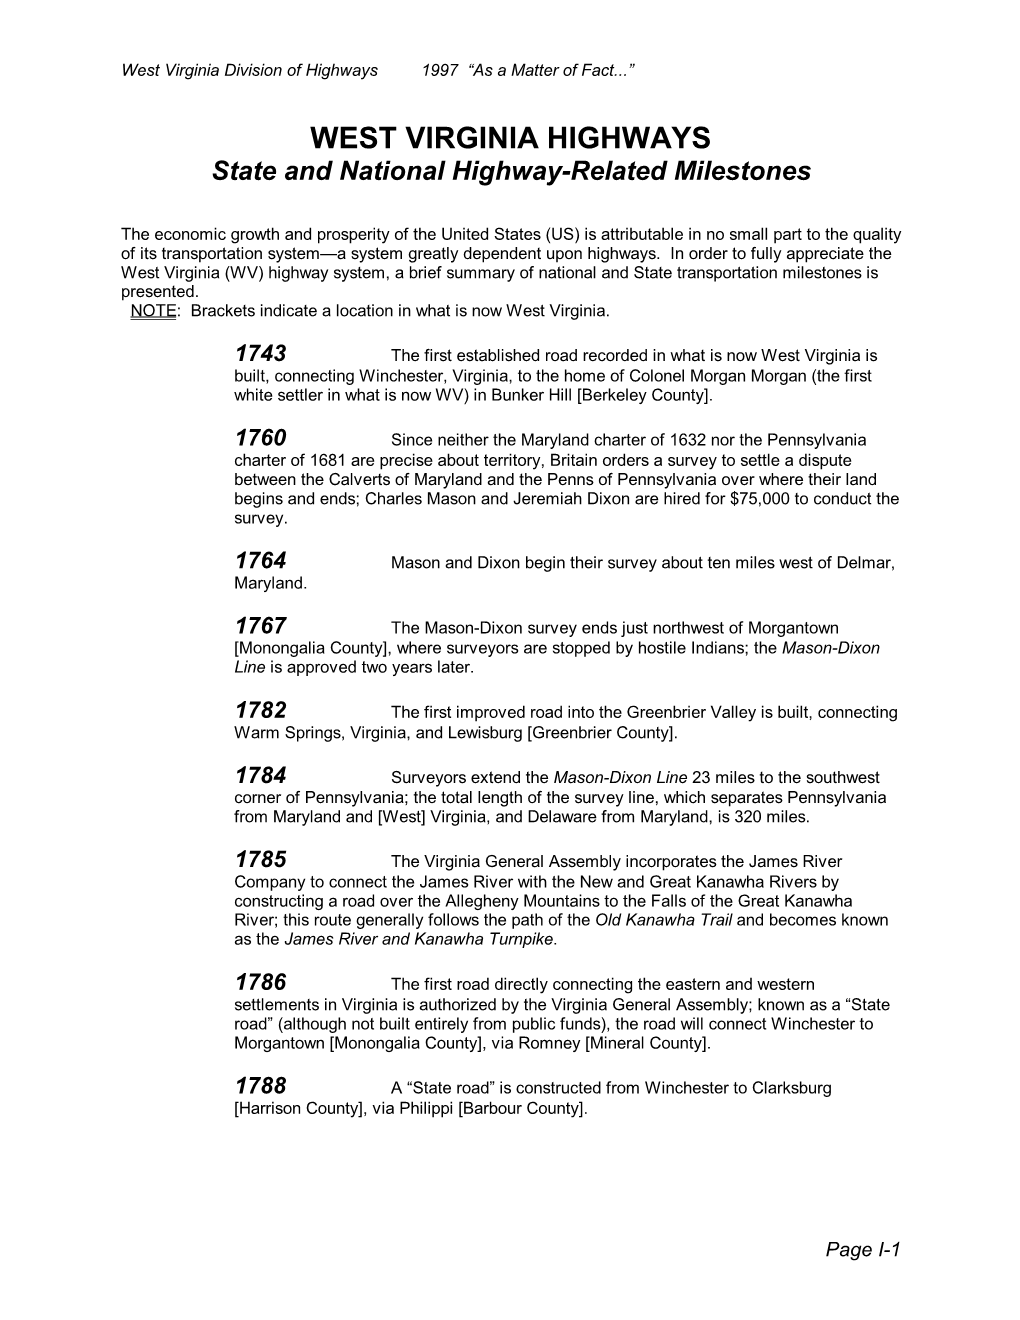 WEST VIRGINIA HIGHWAYS State and National Highway-Related Milestones